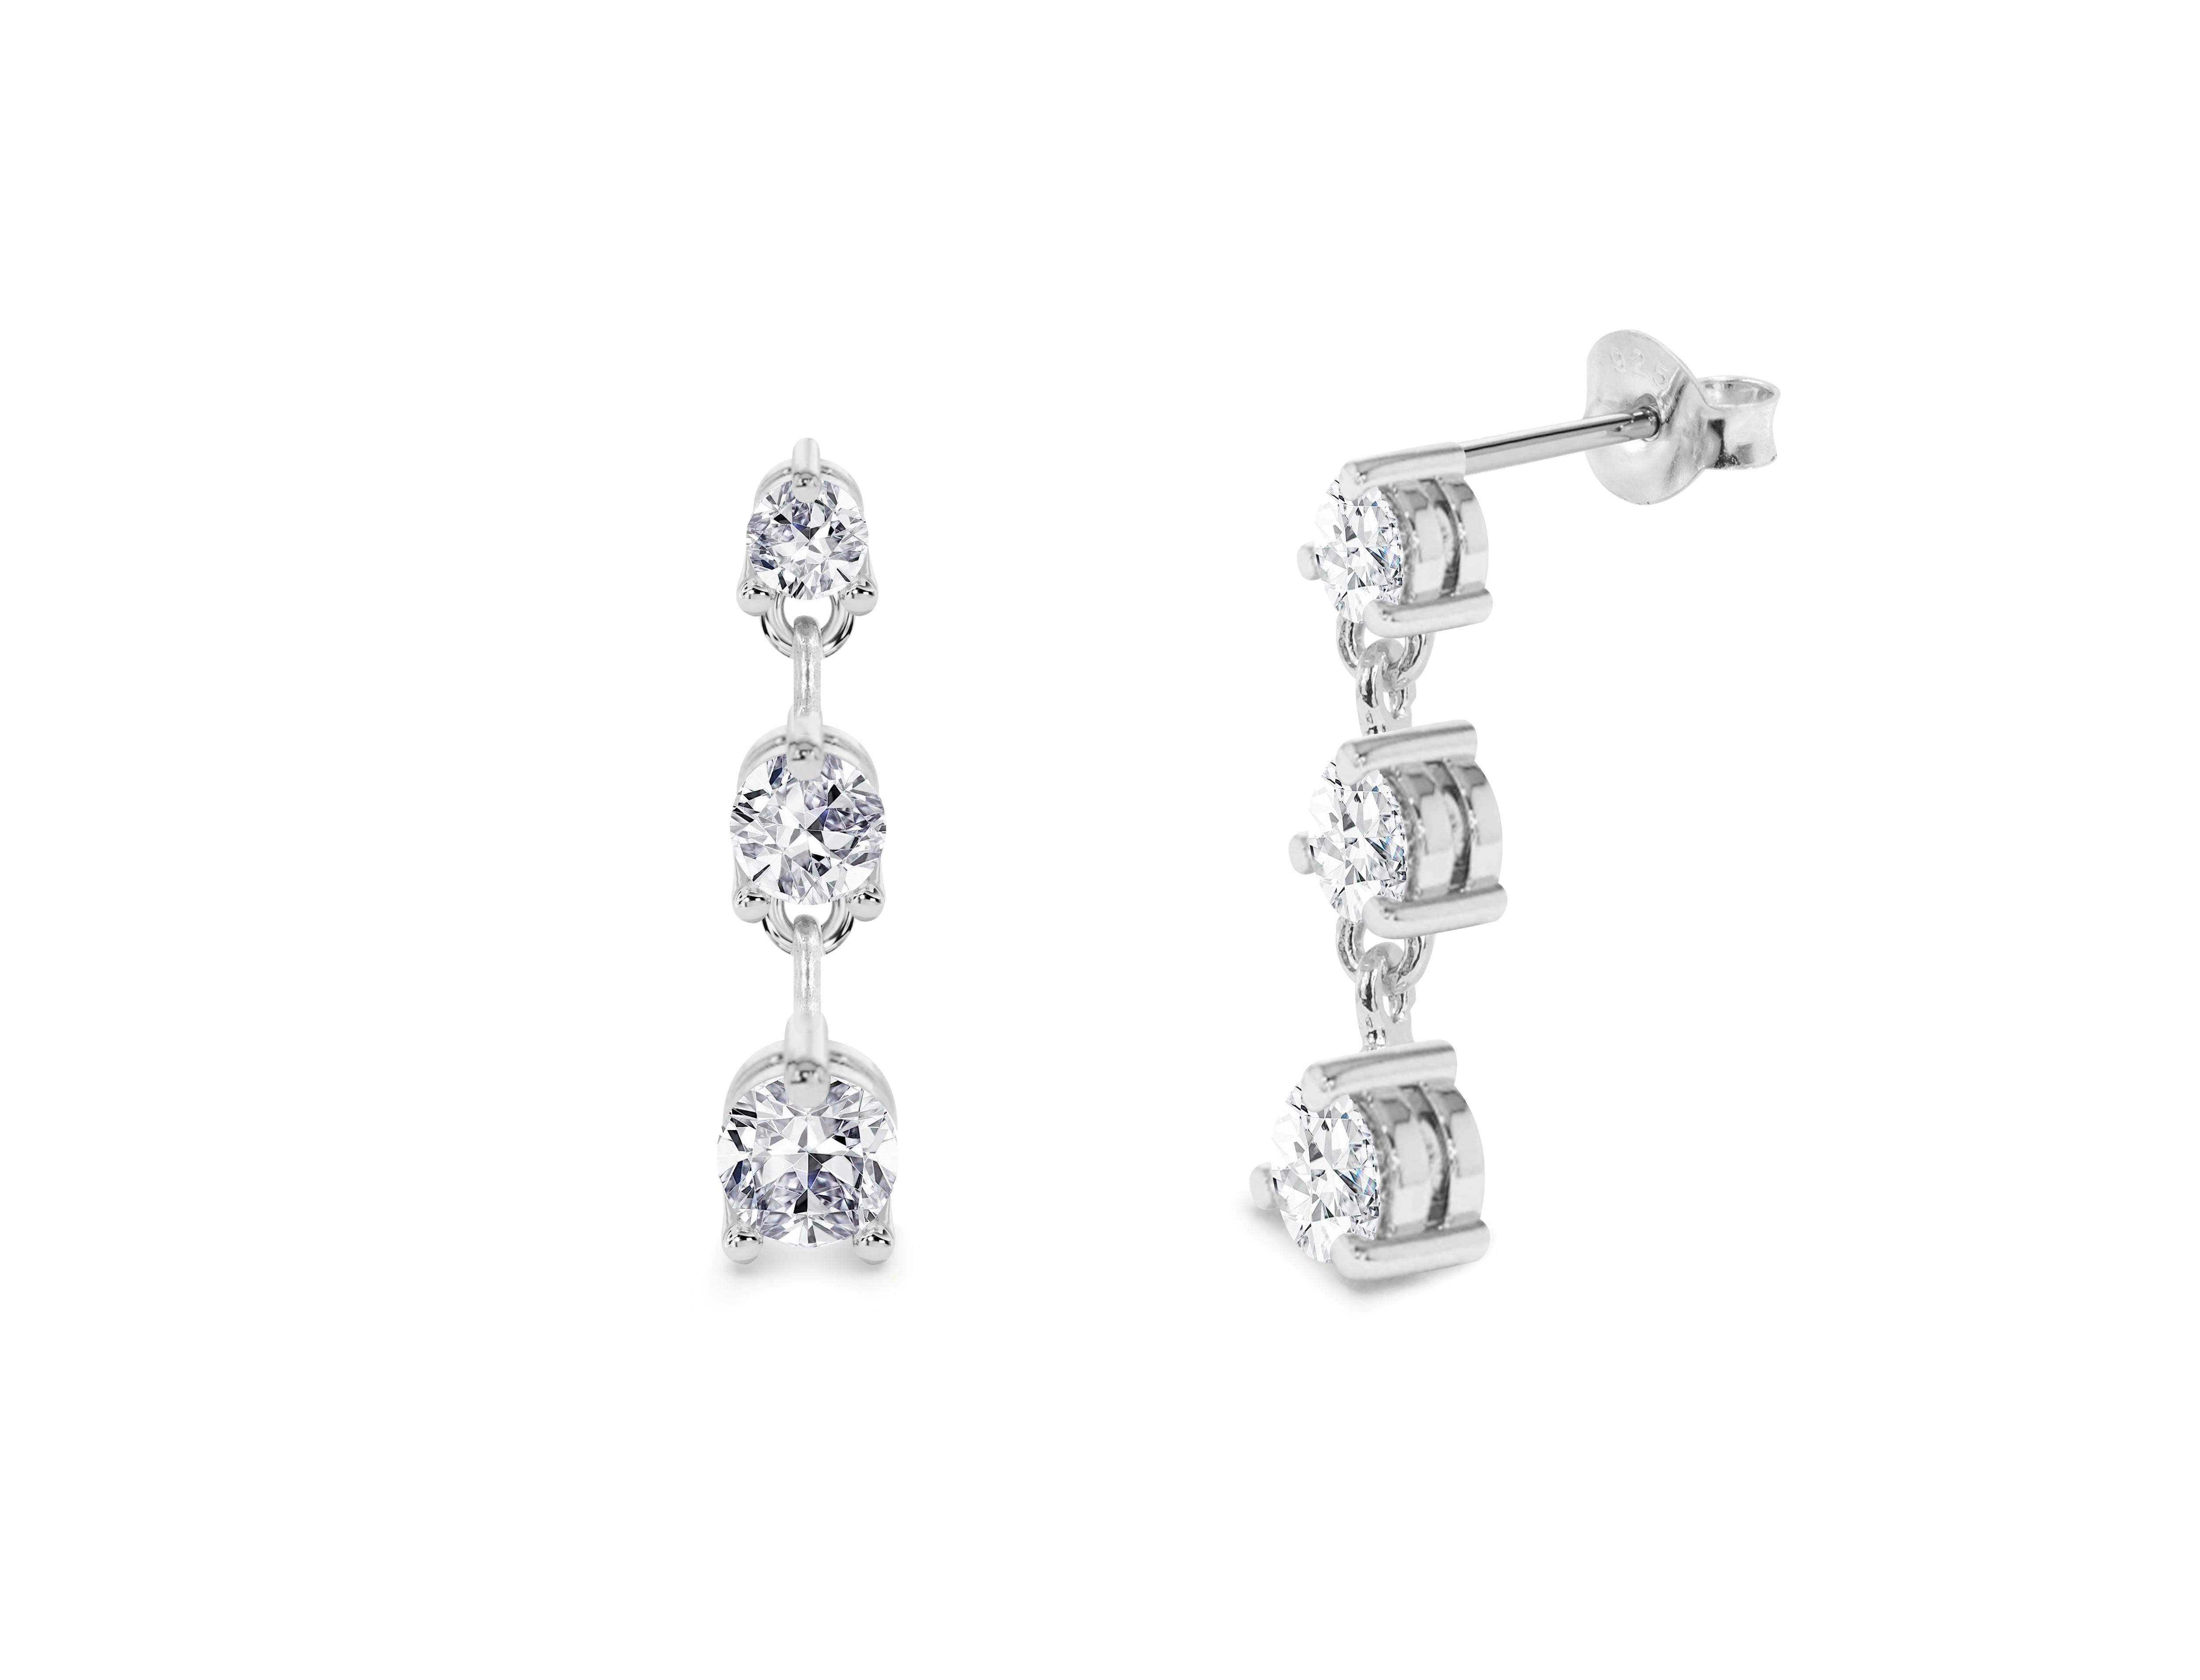 Round Cut 0.45ct Diamond Studs Earrings in 14k Gold For Sale